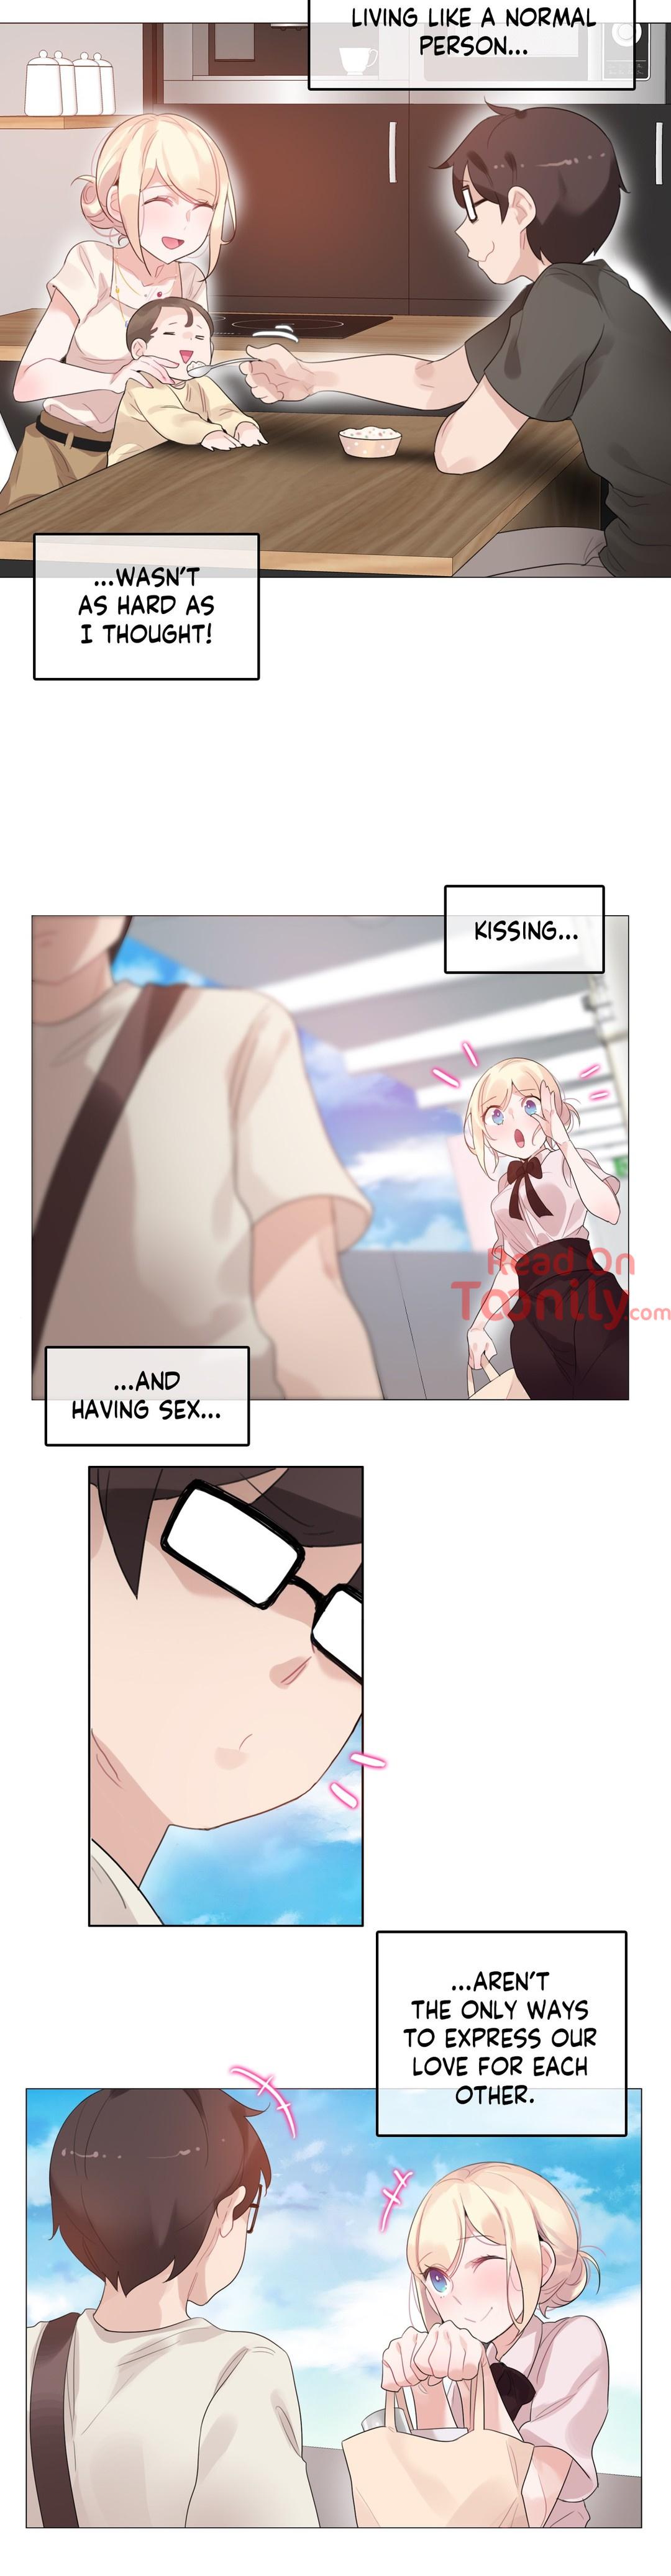 A Pervert's Daily Life • Chapter 66-70 62